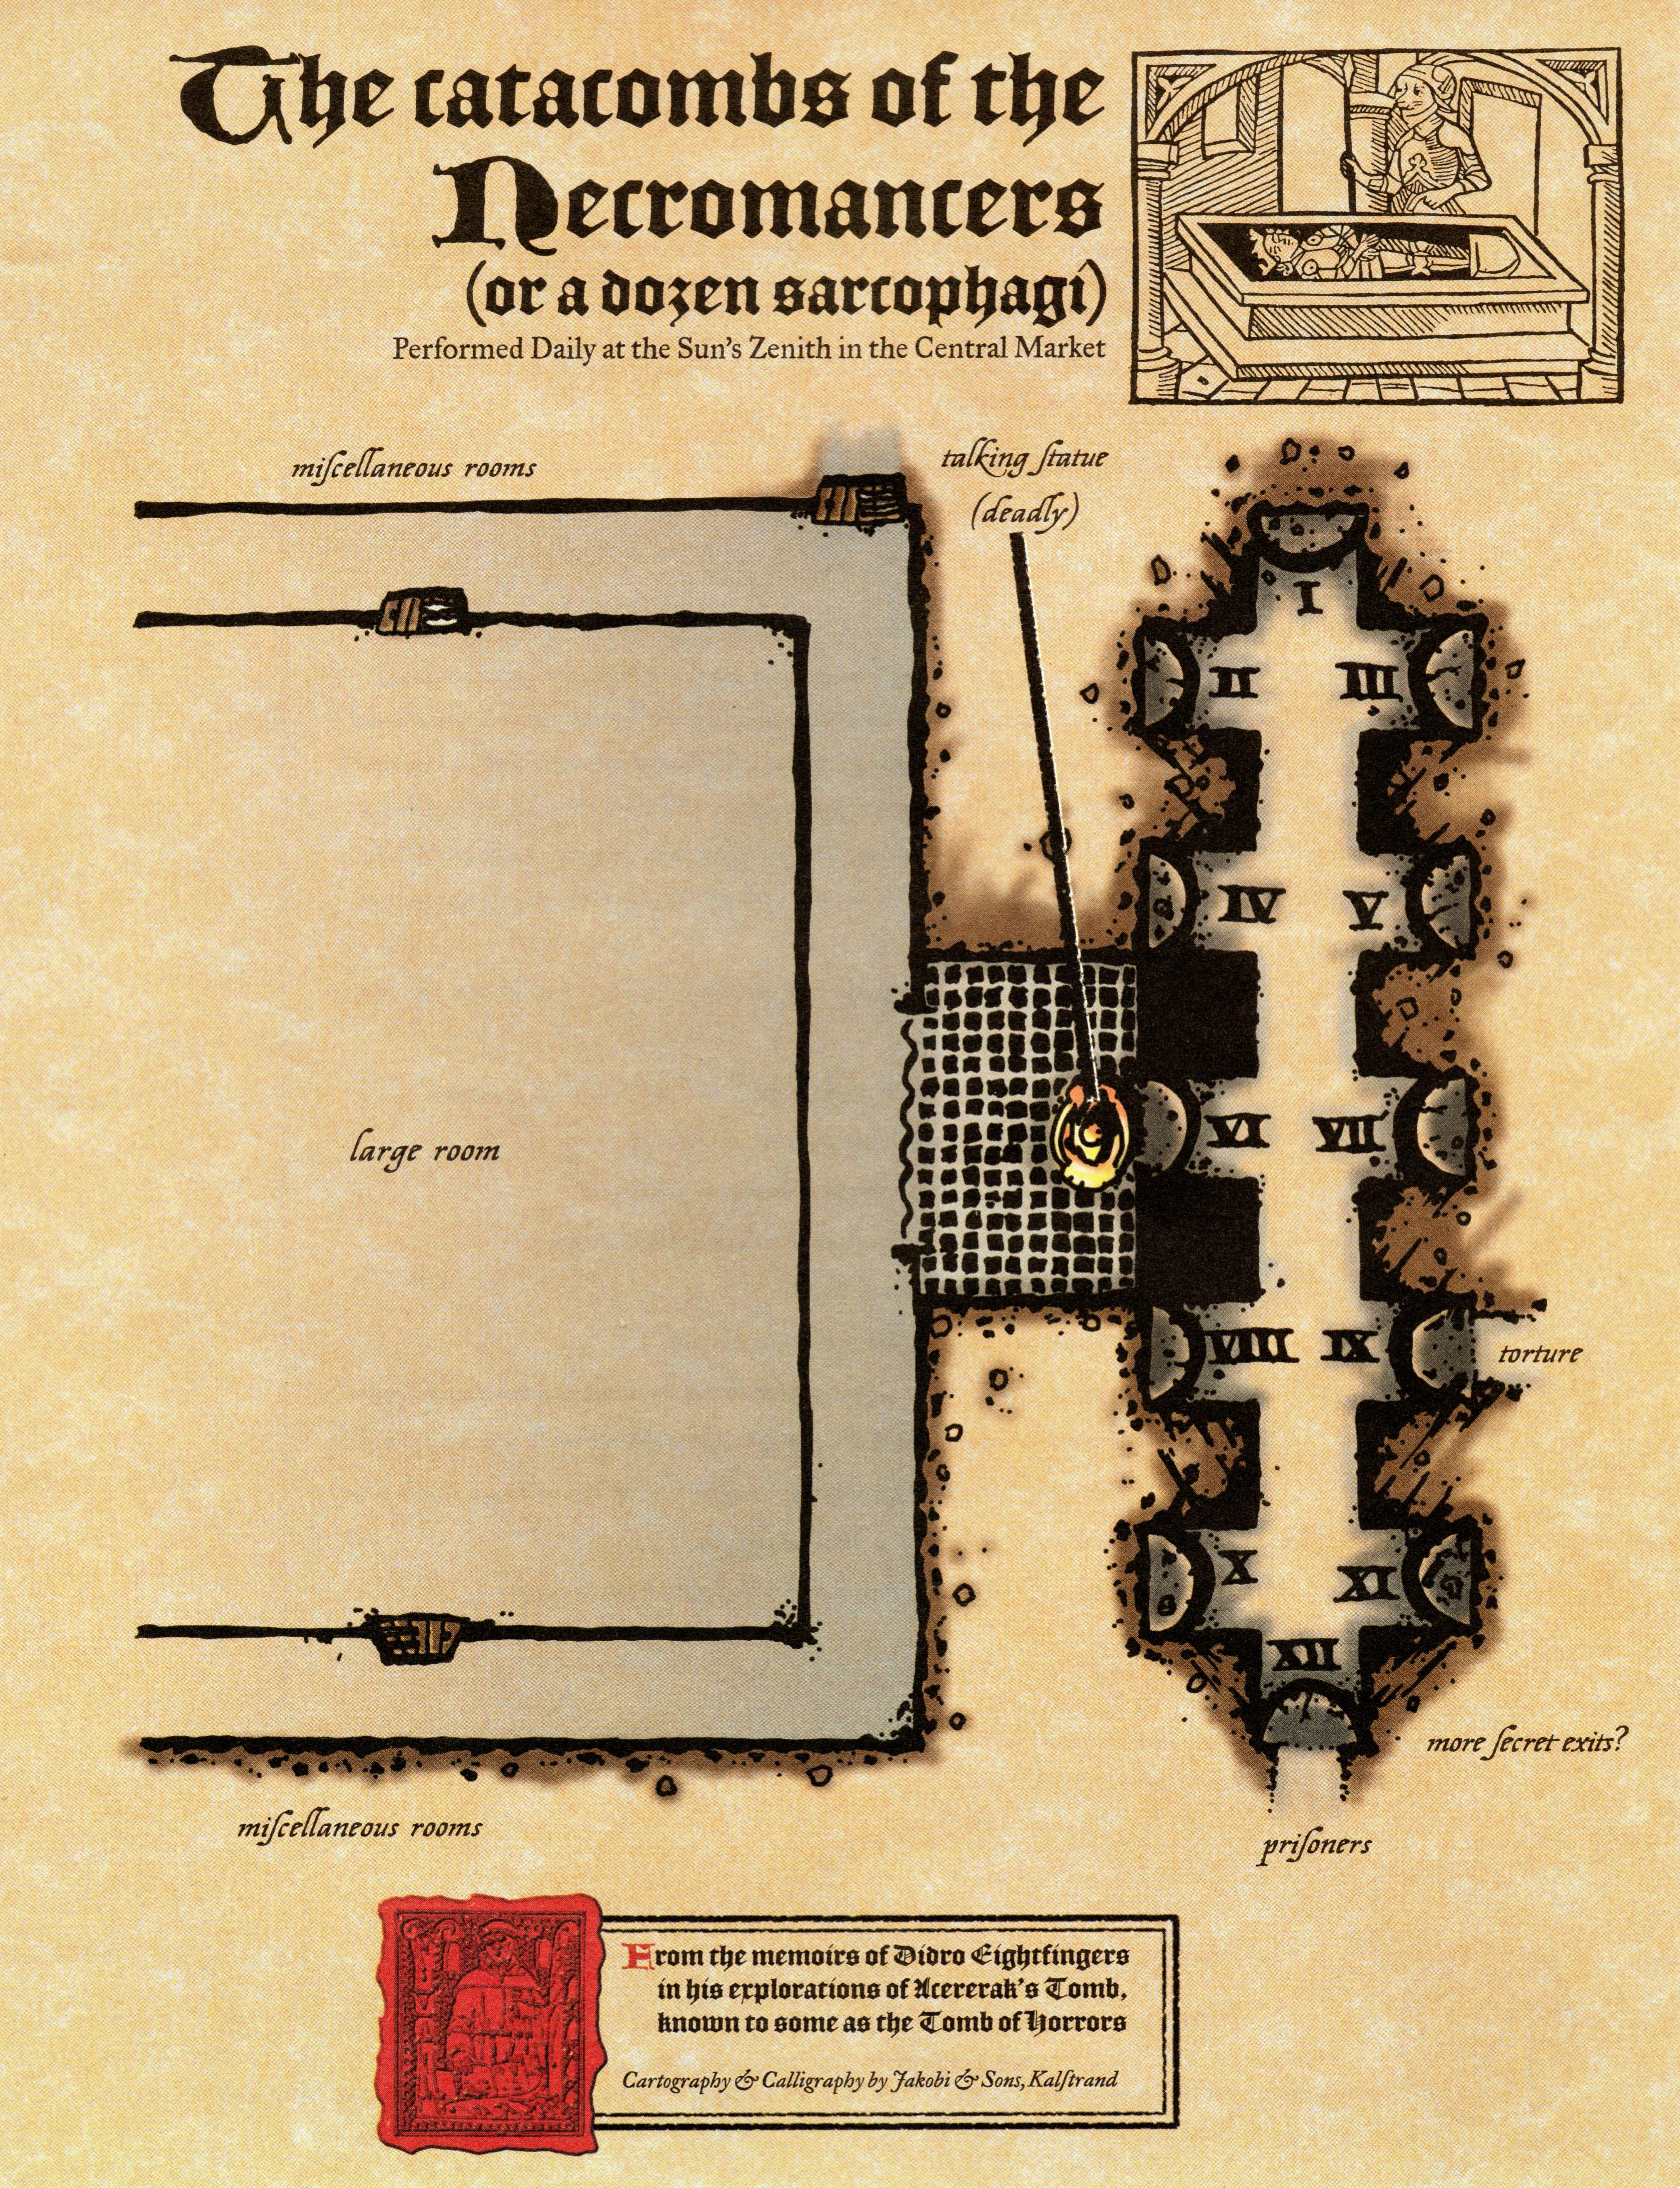 The Catacombs of the Necromancers Side 1.jpg